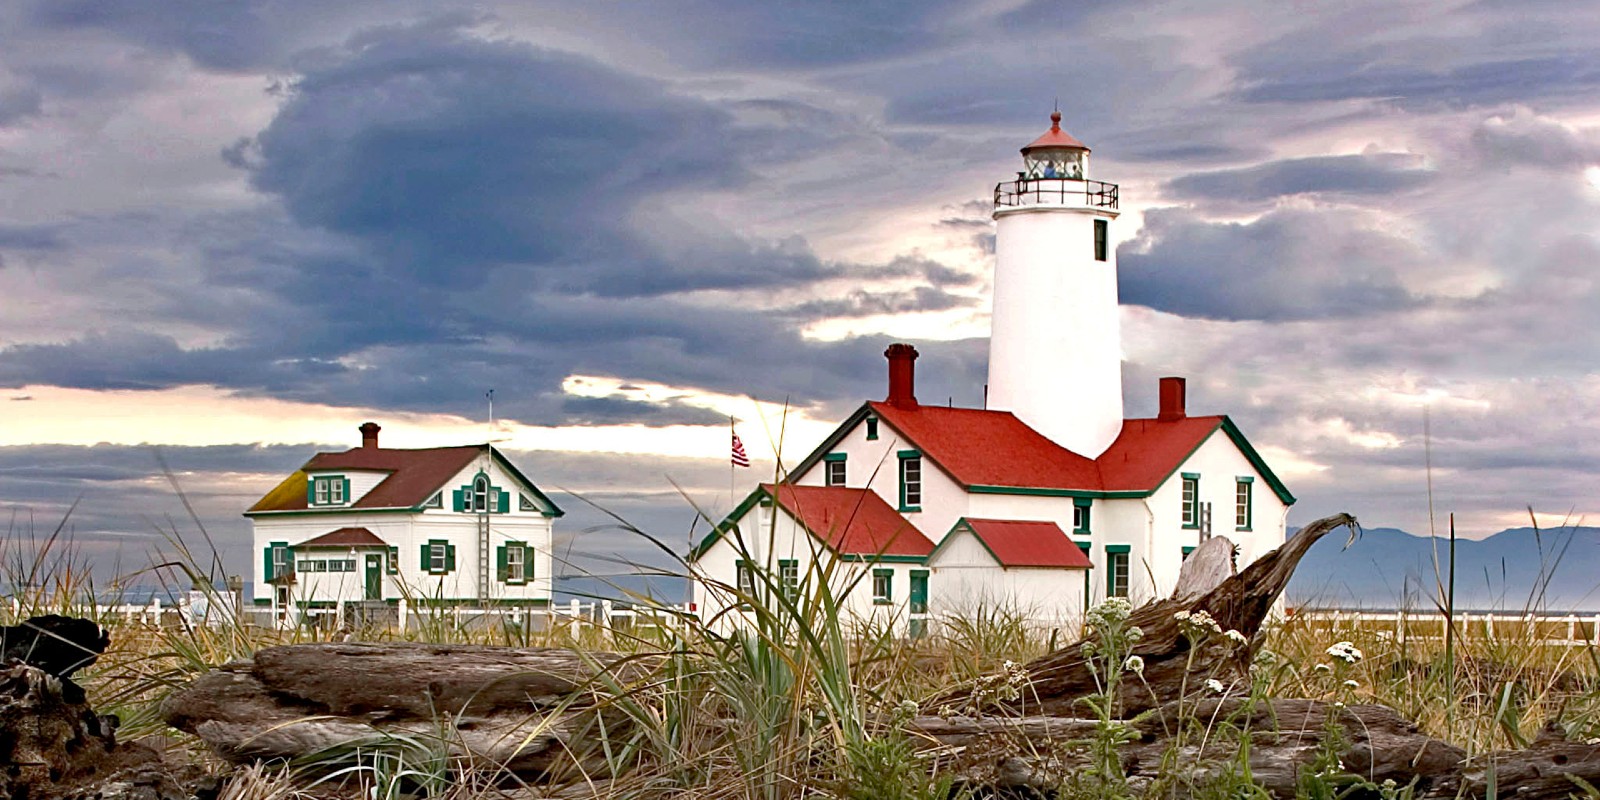 The New Dungeness Light Station at the tip of Dungeness Spit